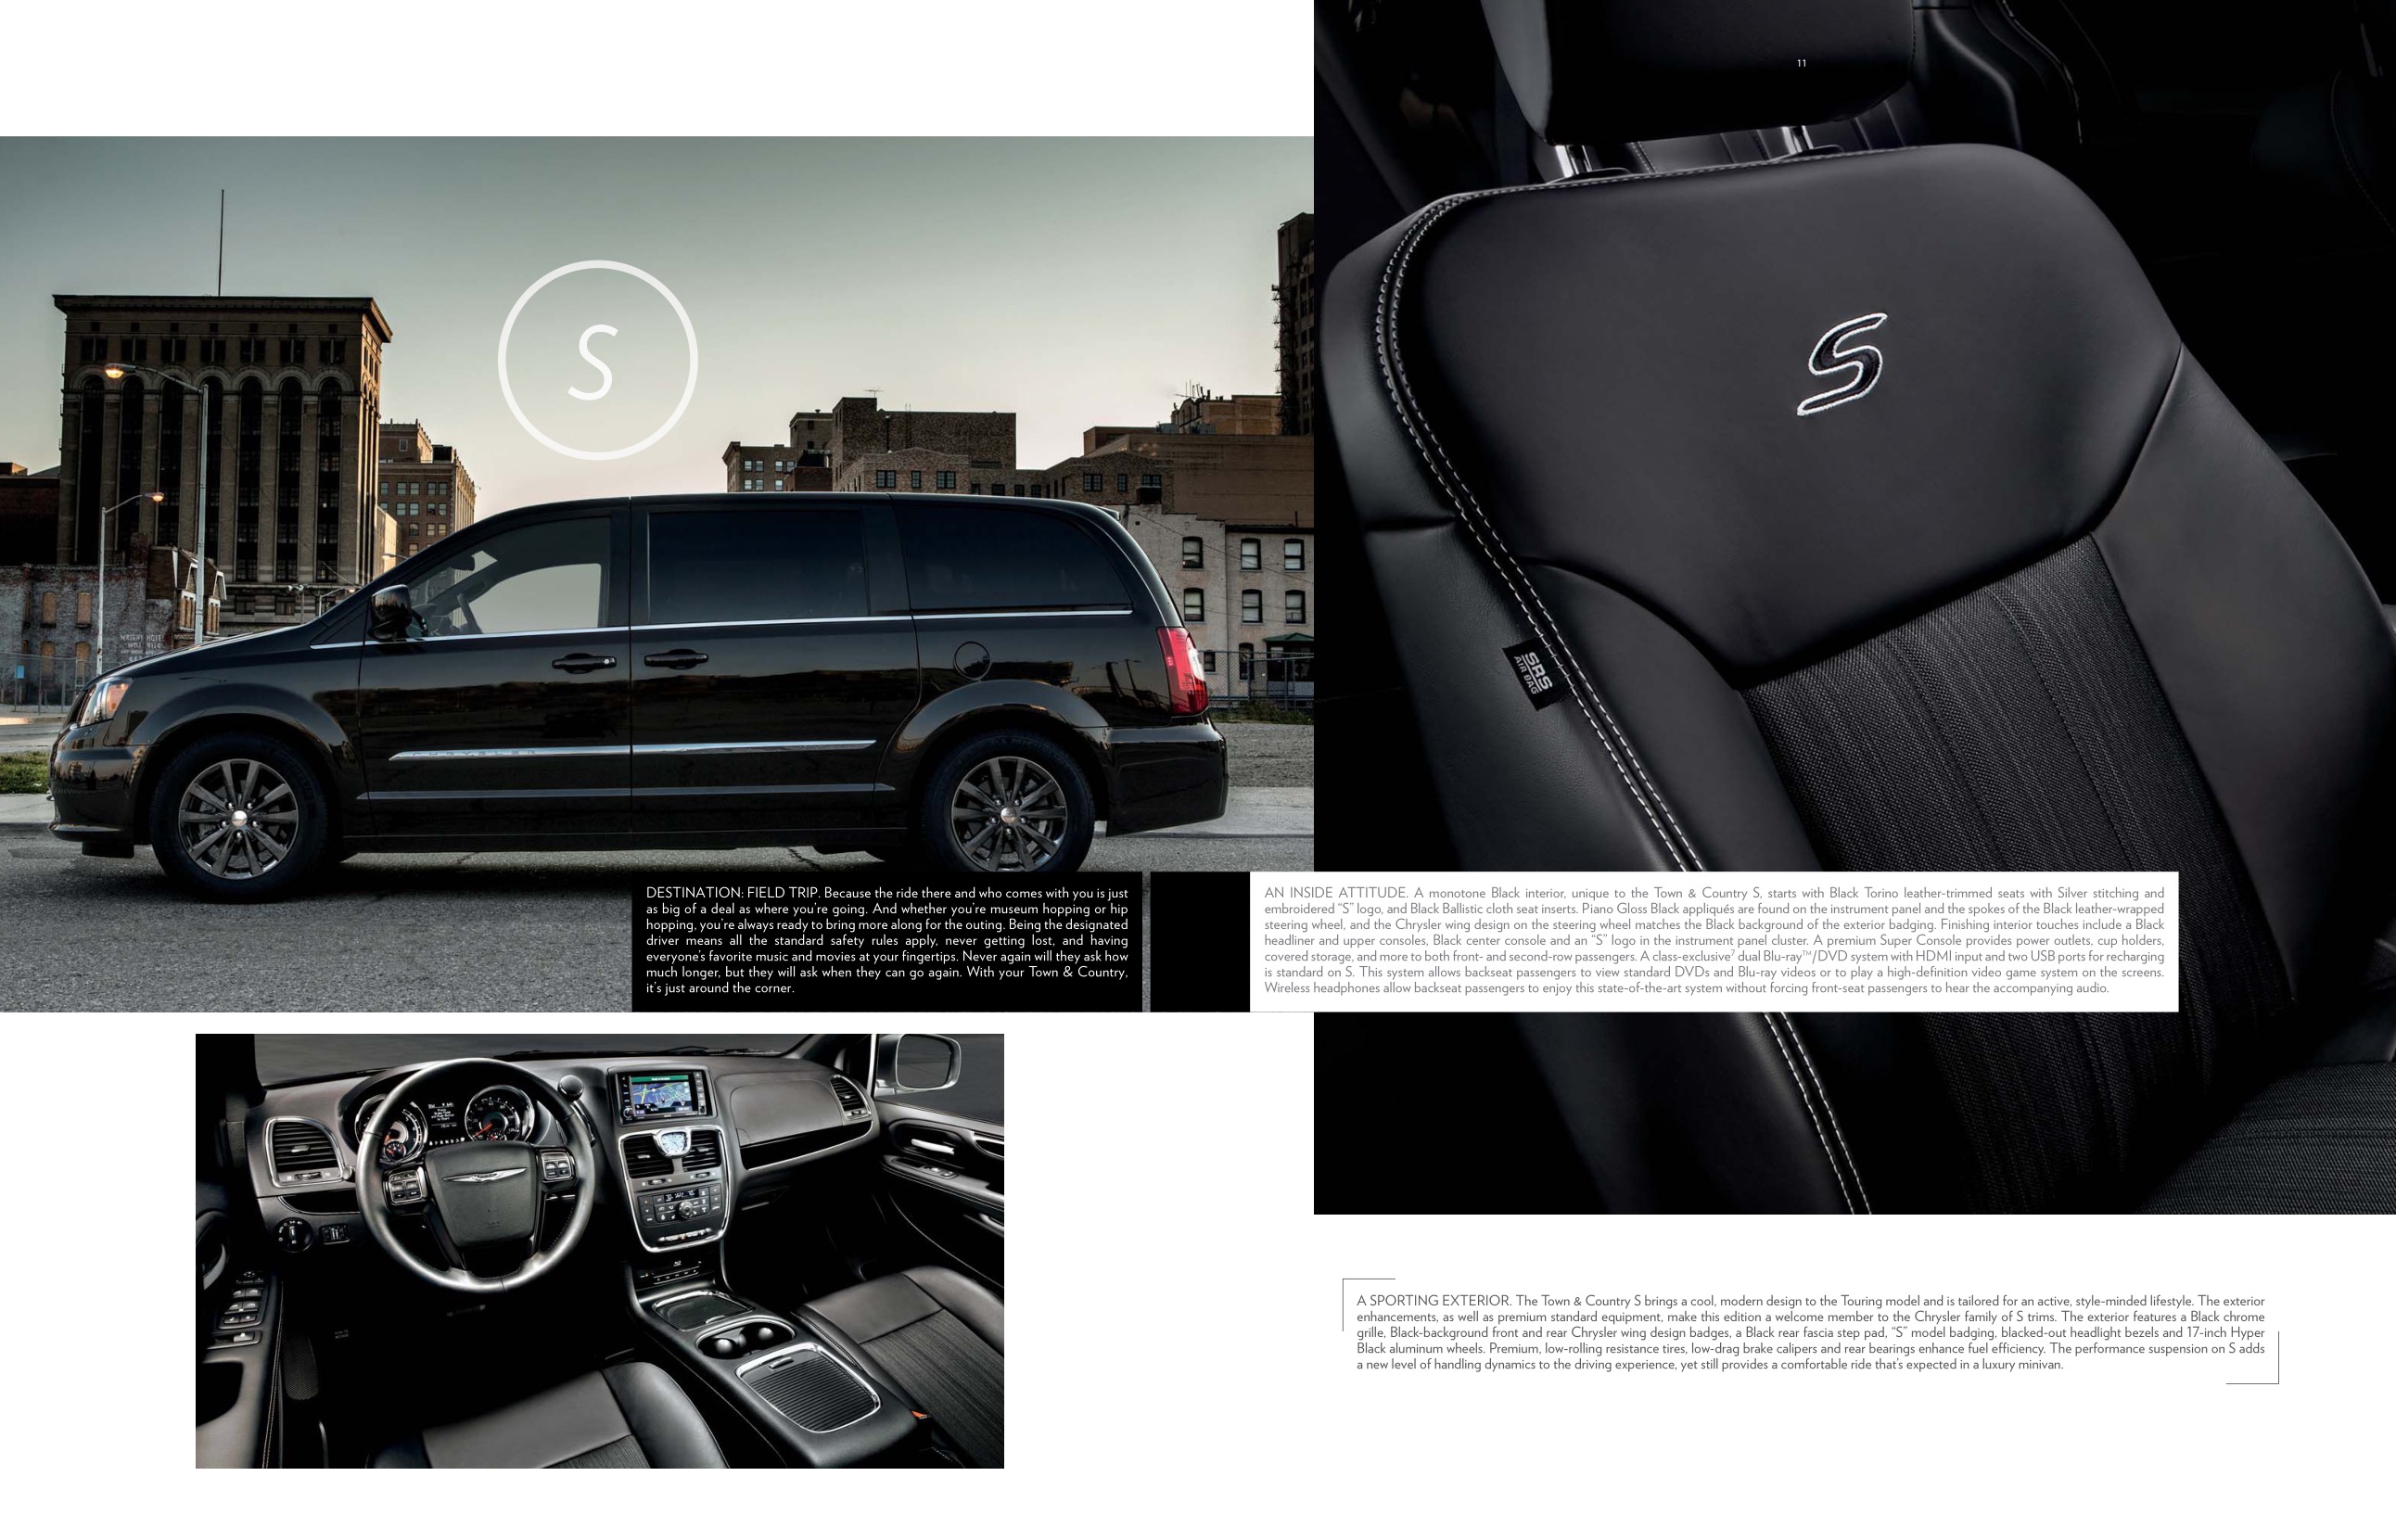 2015 Chrysler Town & Country Brochure Page 2